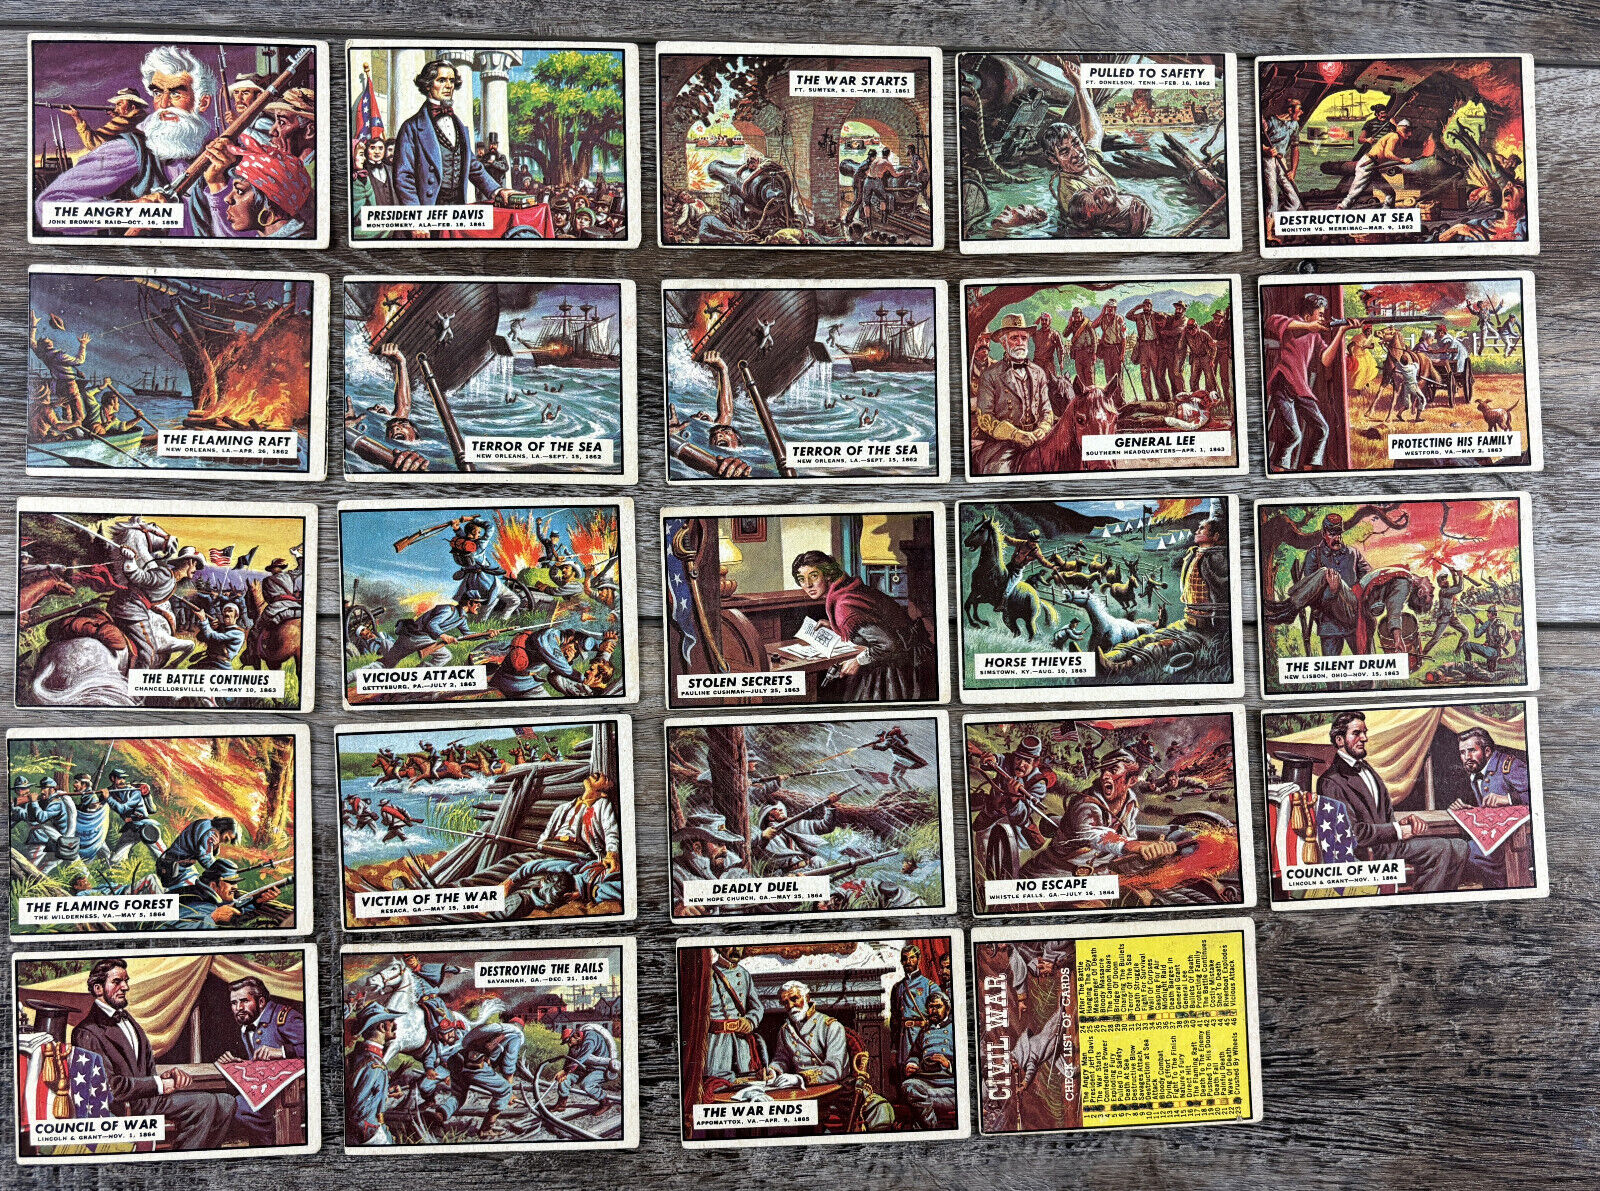 1962 Topps Civil War Trading Card Lot of 24 (22 Diff.) - Poor - VG